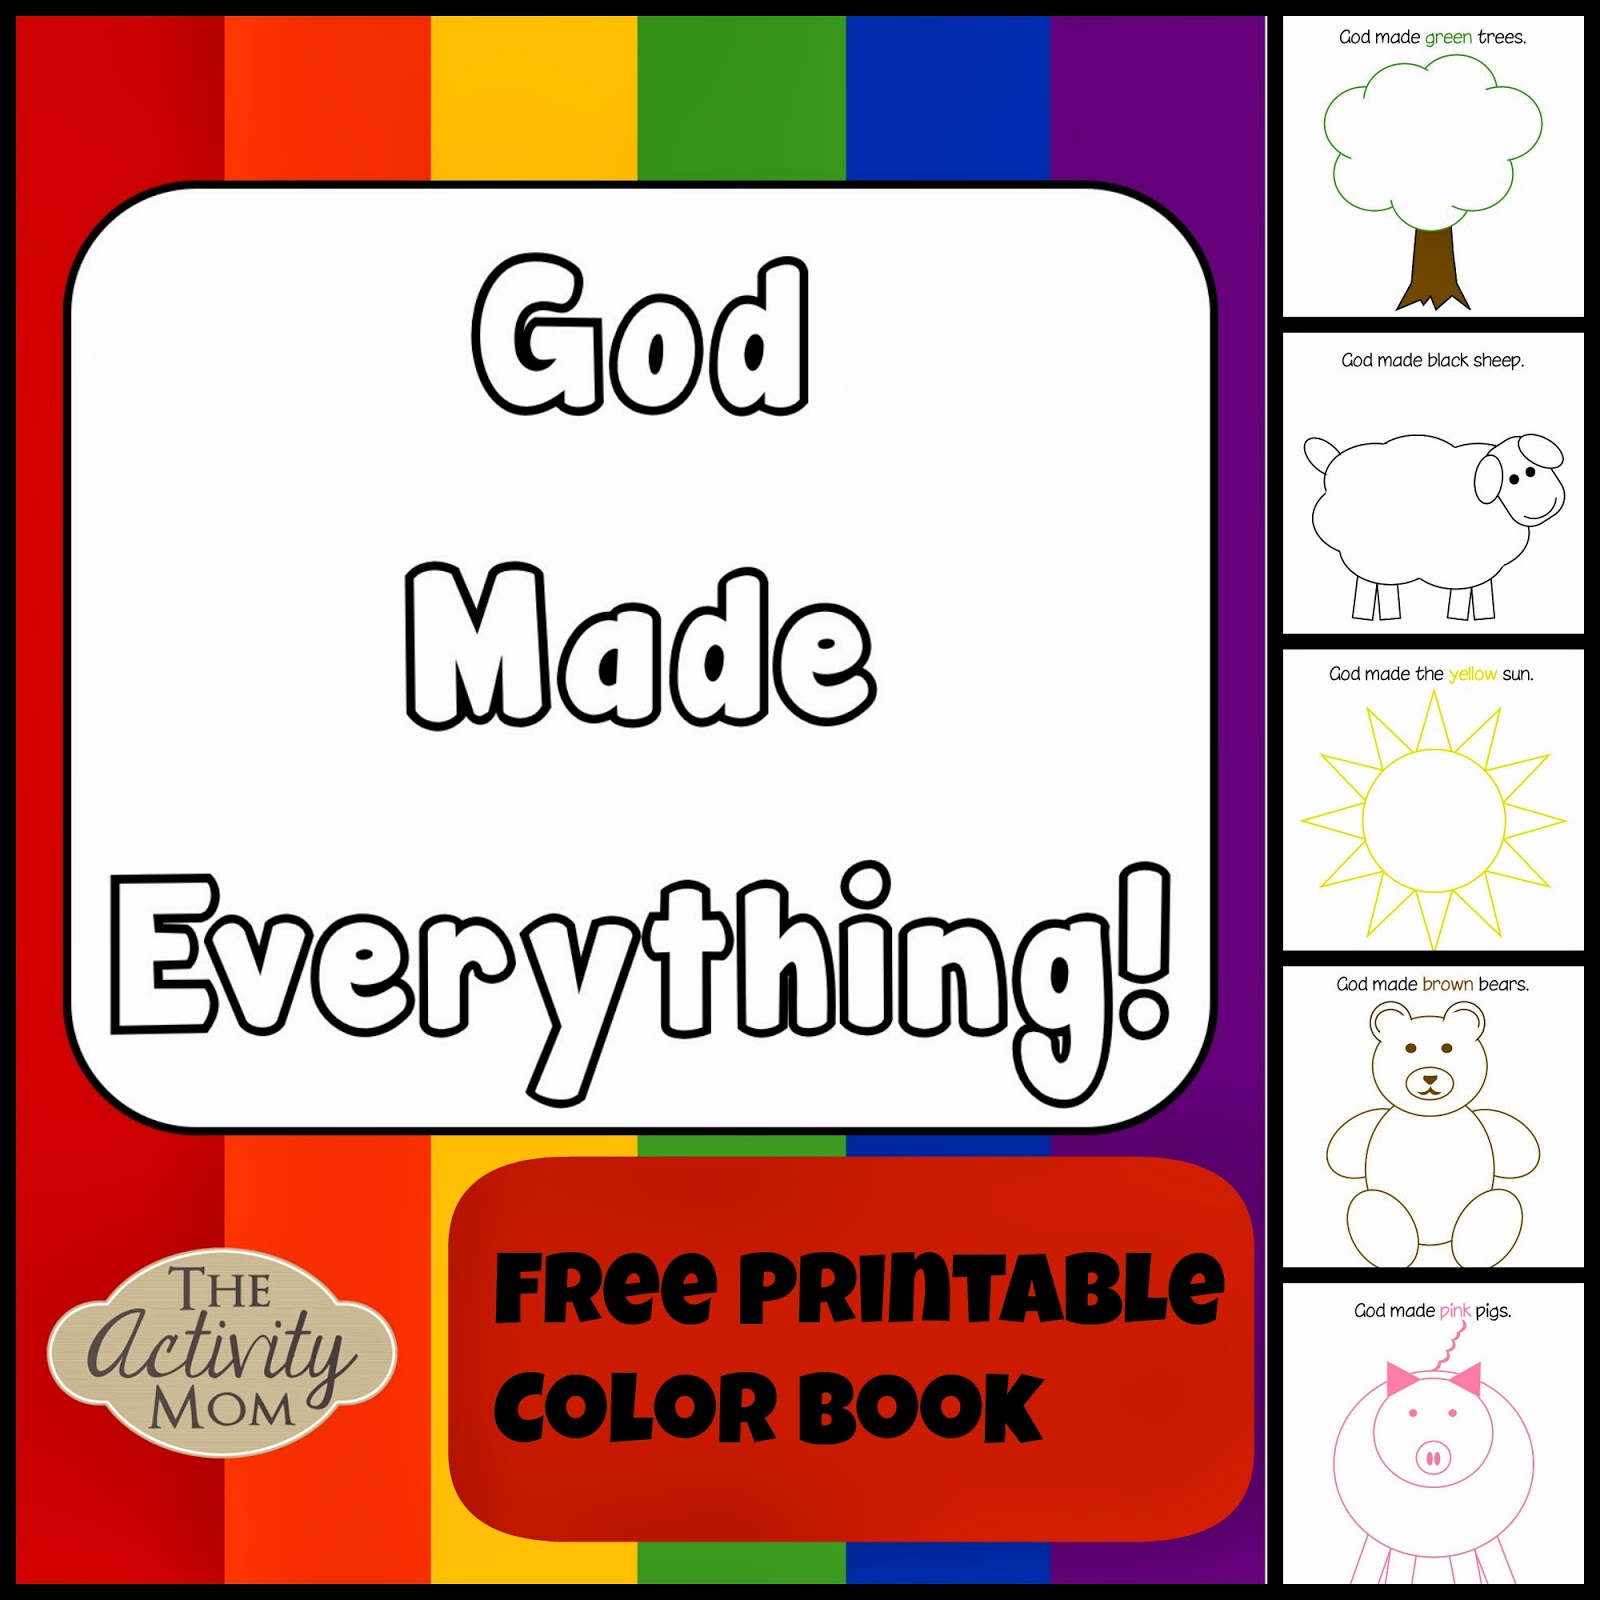 God made everything colors book